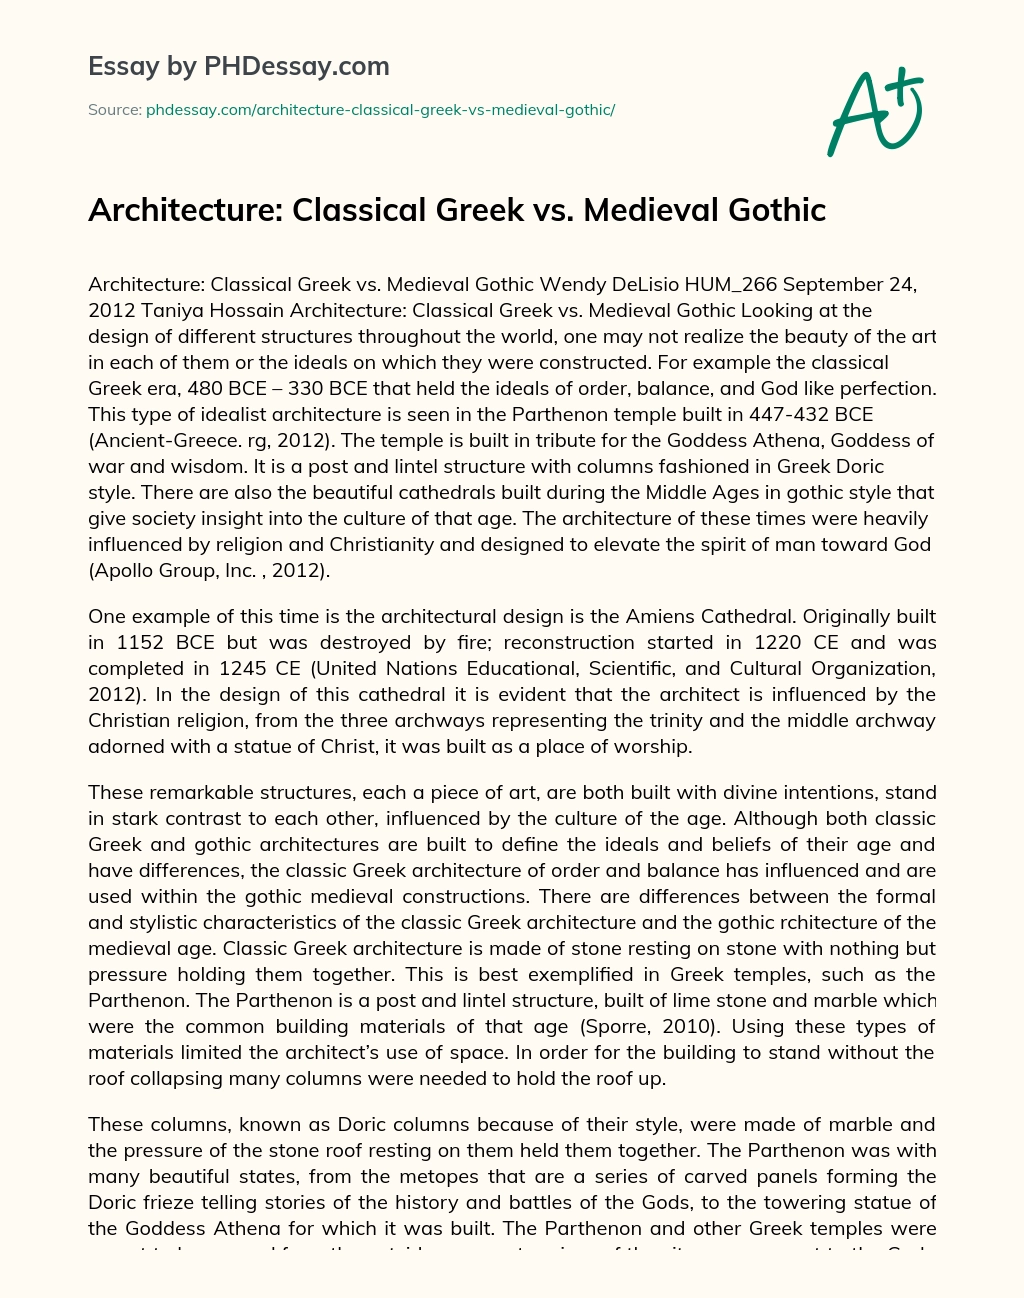 Architecture: Classical Greek vs. Medieval Gothic essay